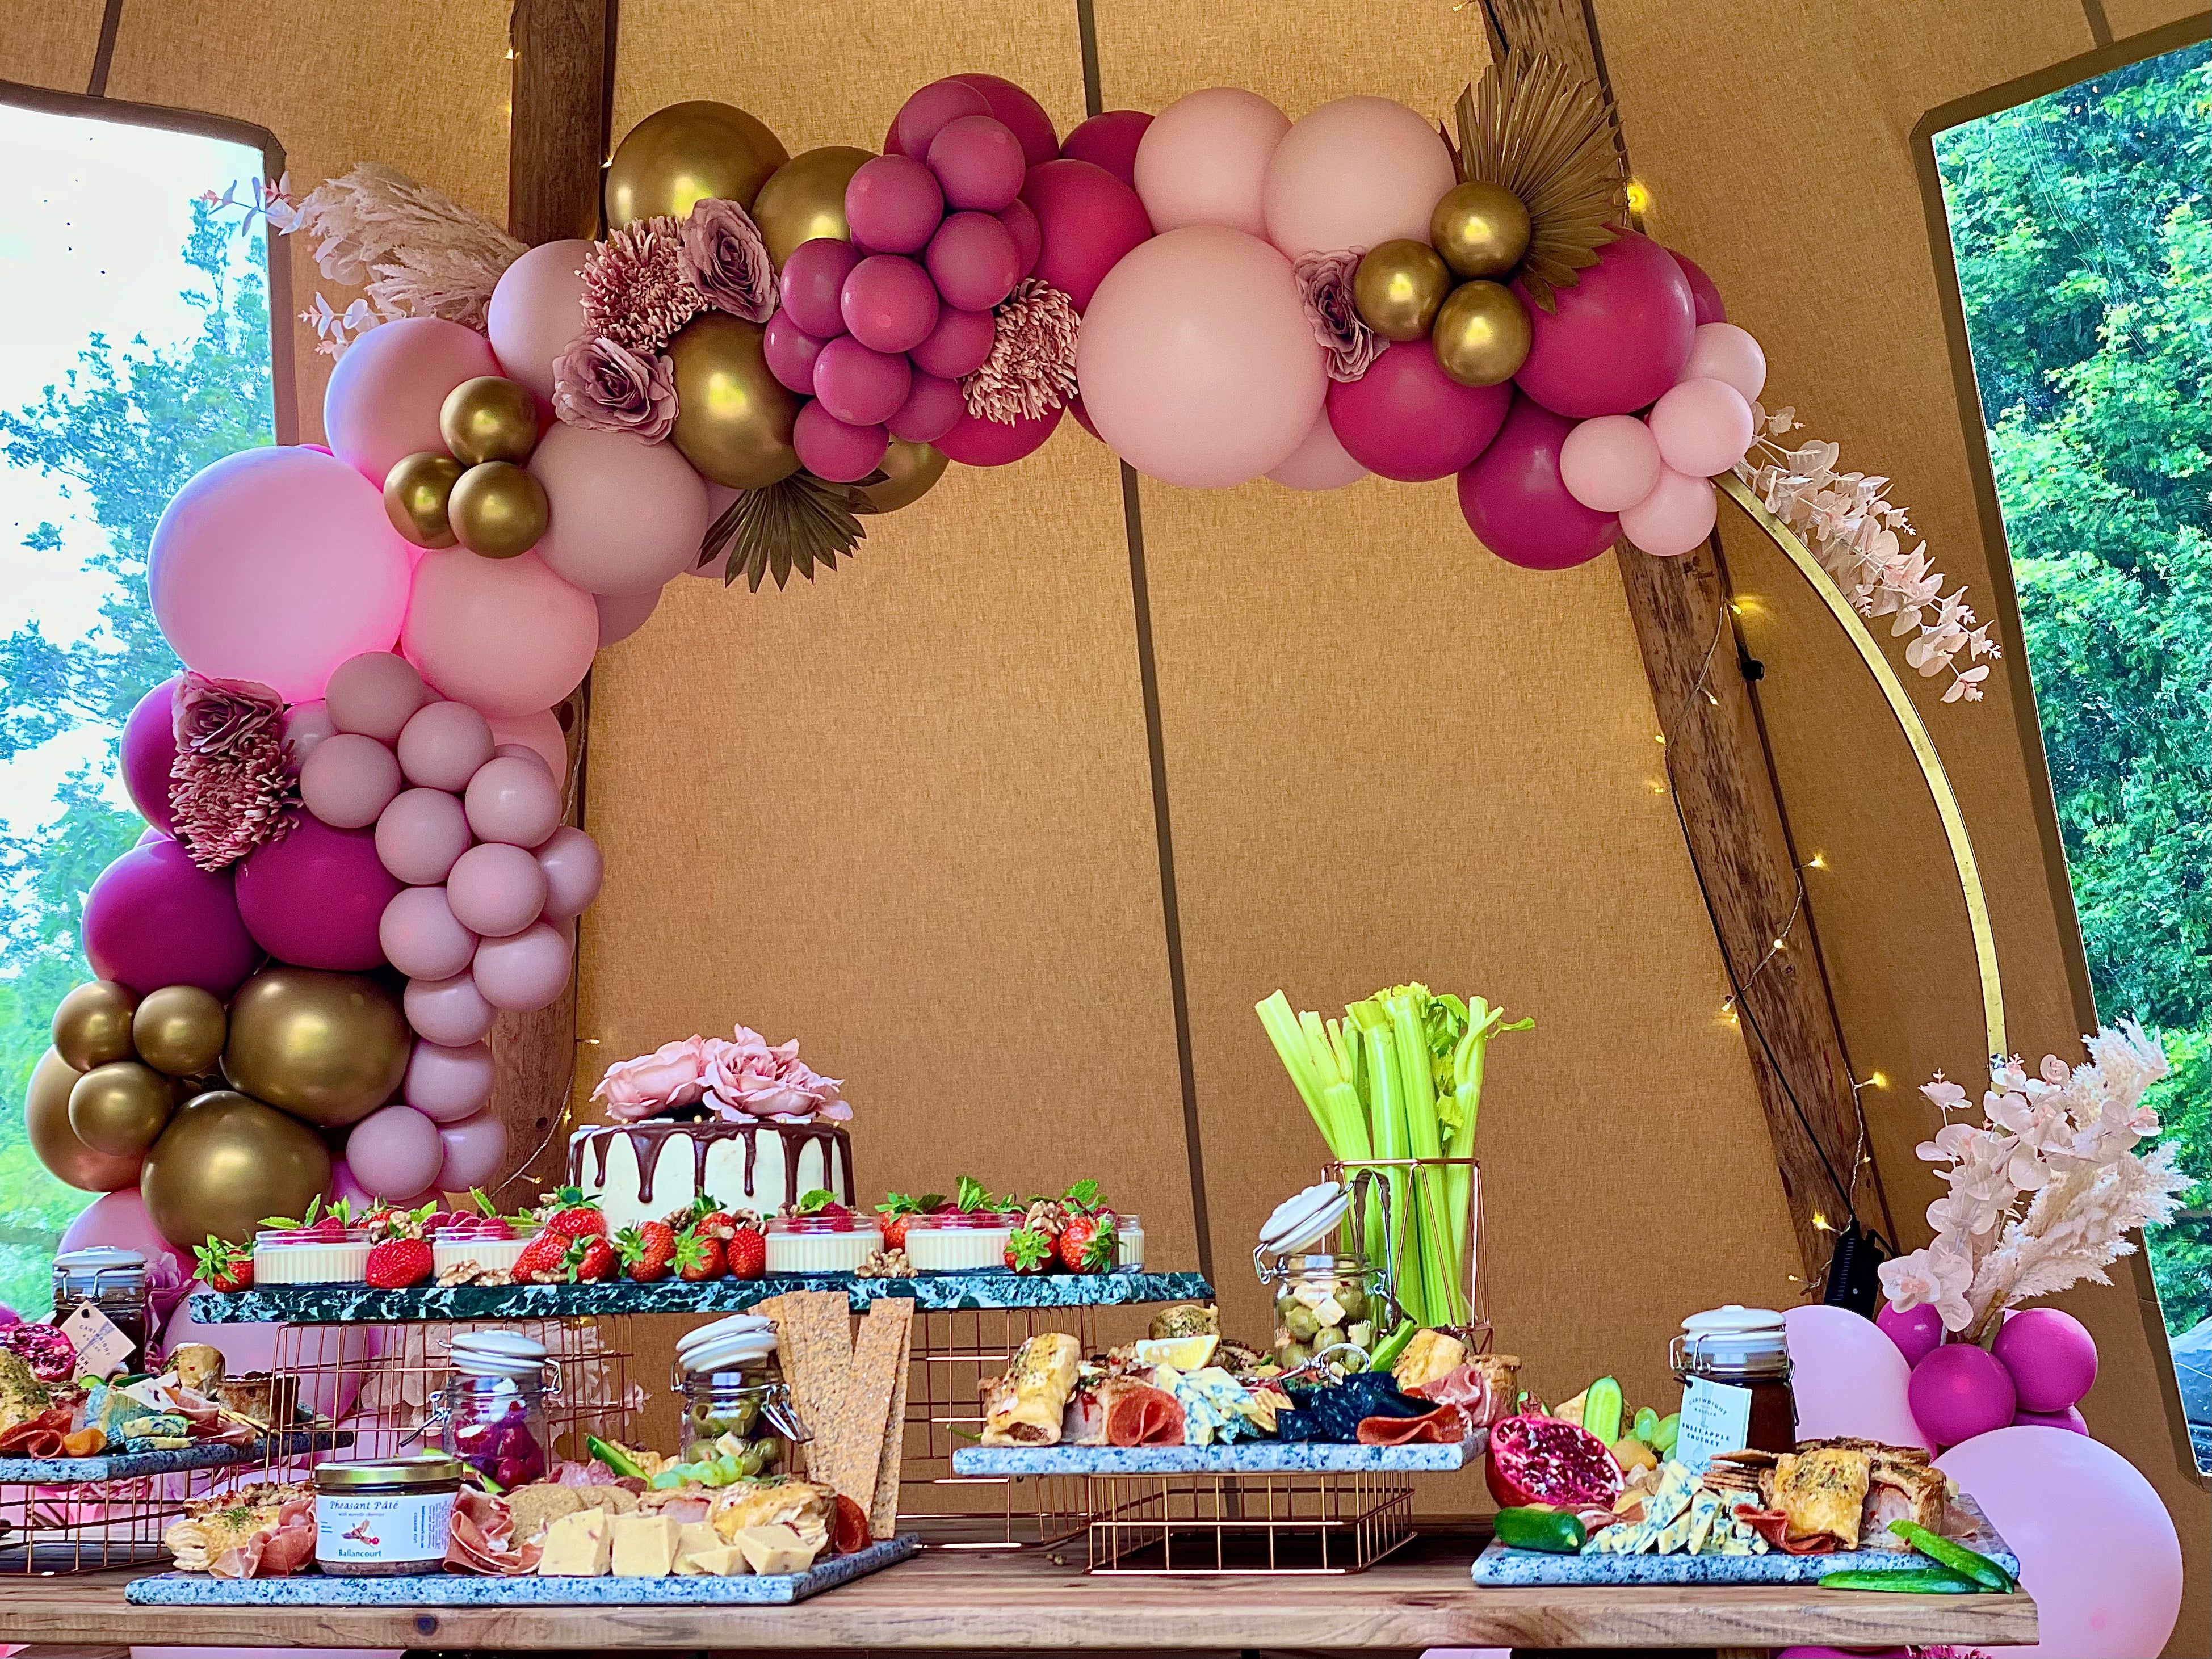 Tipi Event Package with Grazing Table, Balloon Arch & Celebration Cake - for 20 people